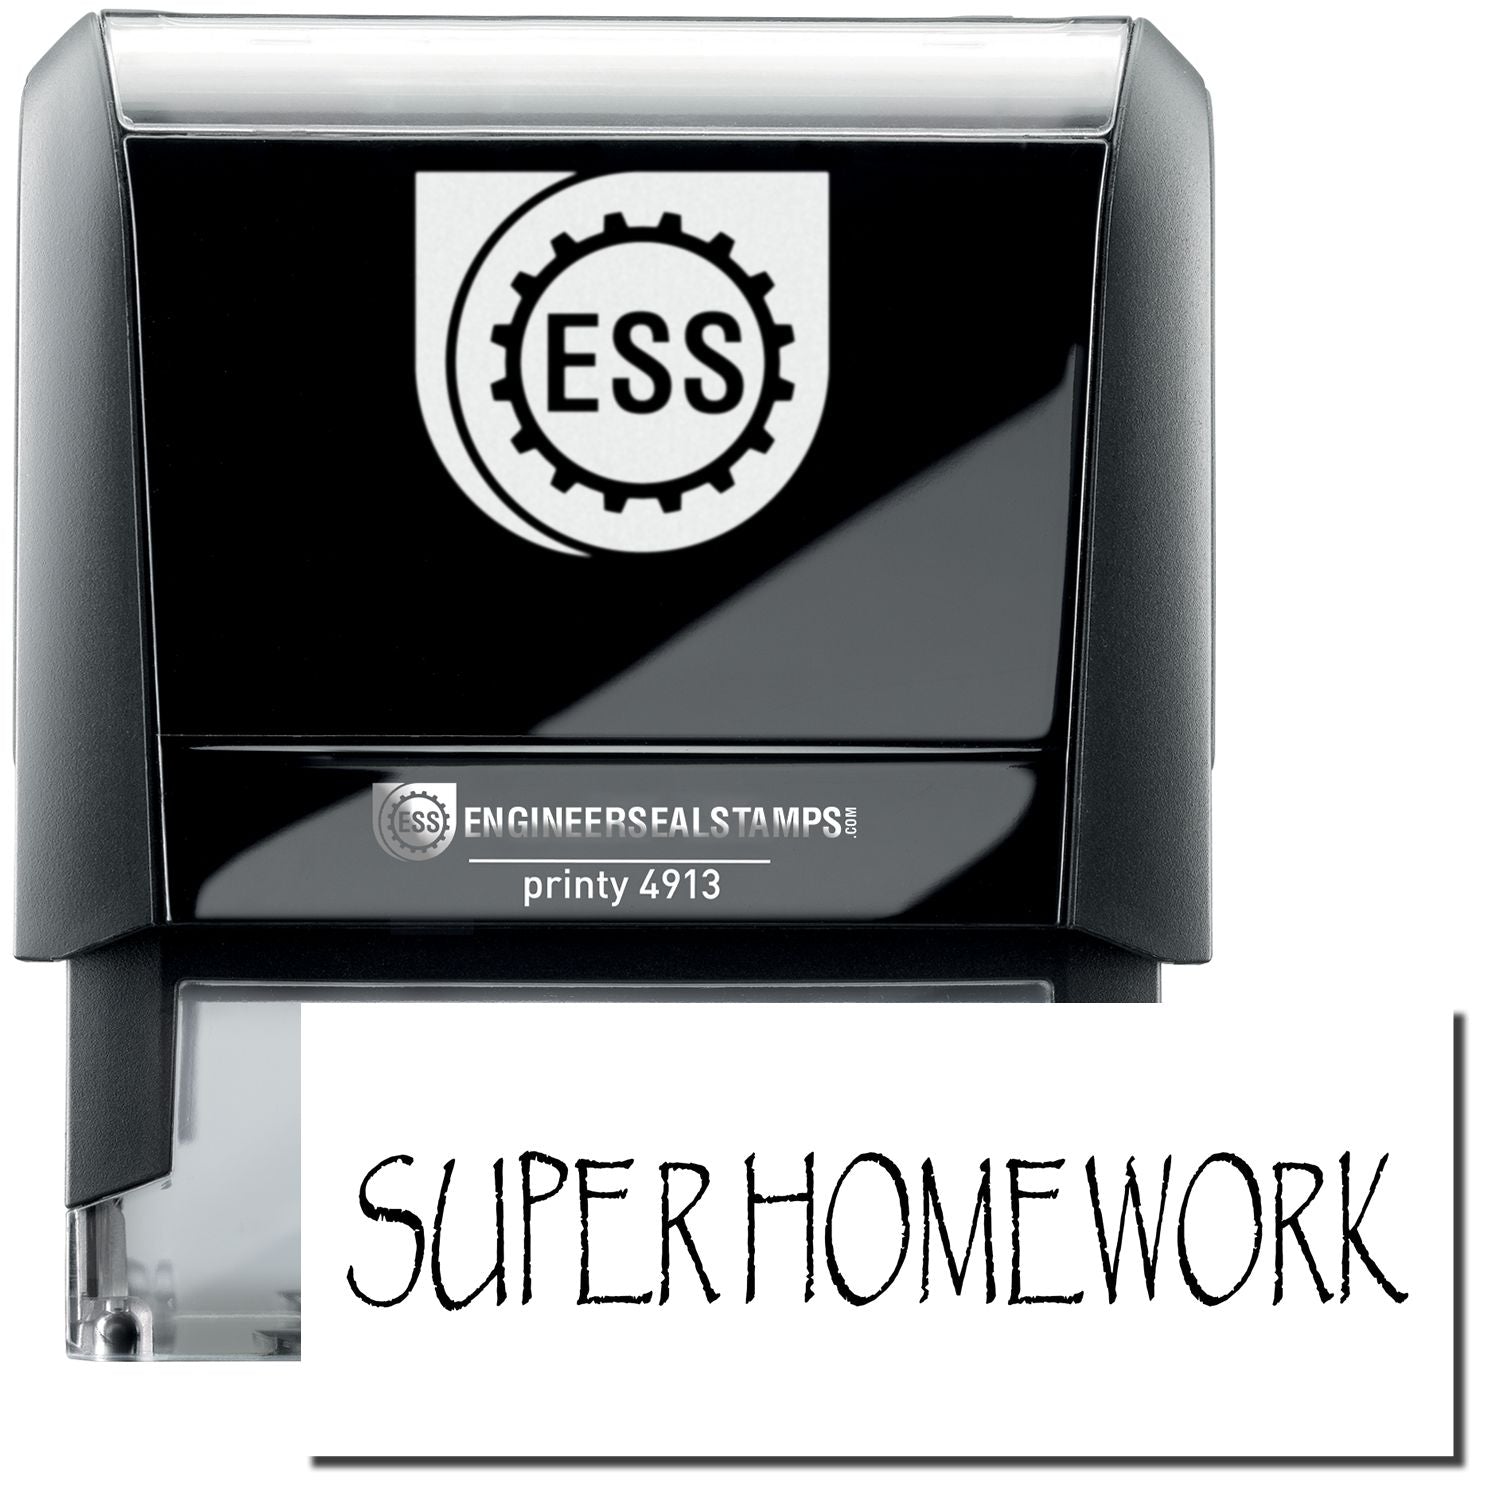 A self-inking stamp with a stamped image showing how the text "SUPER HOMEWORK" in a unique large font is displayed after stamping.